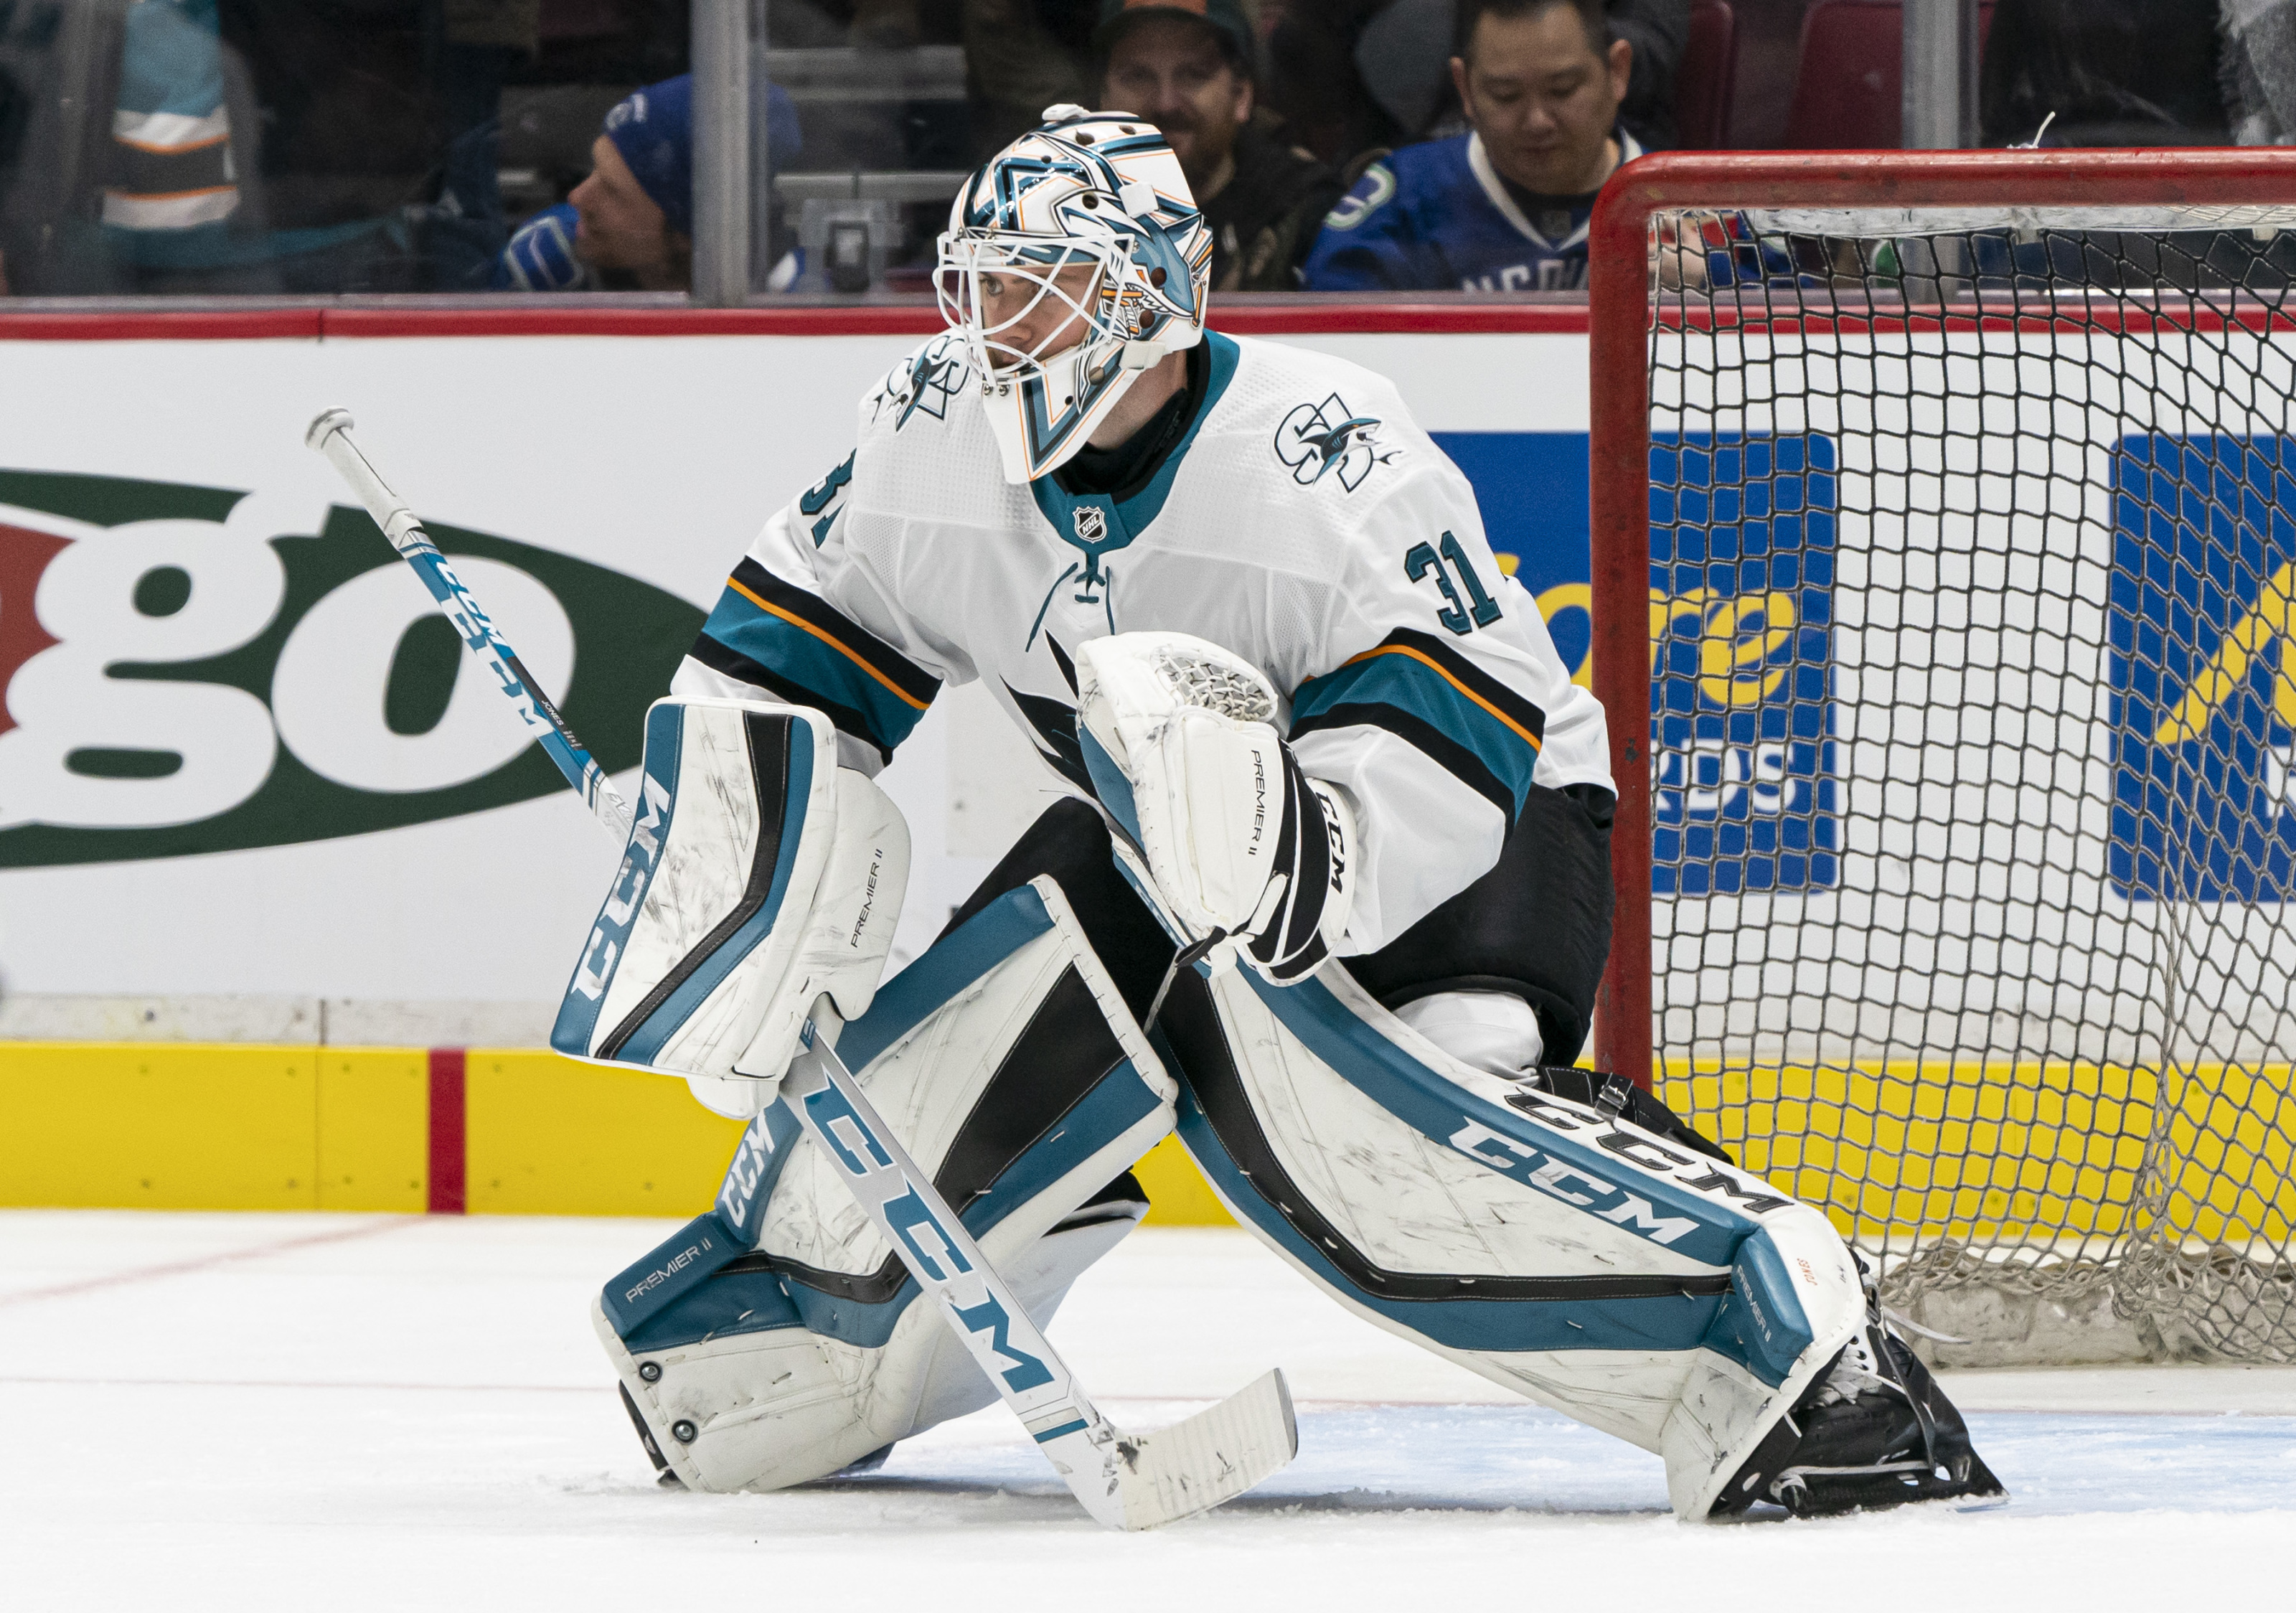 Sharks' Martin Jones: From undrafted goalie to NHL all-star